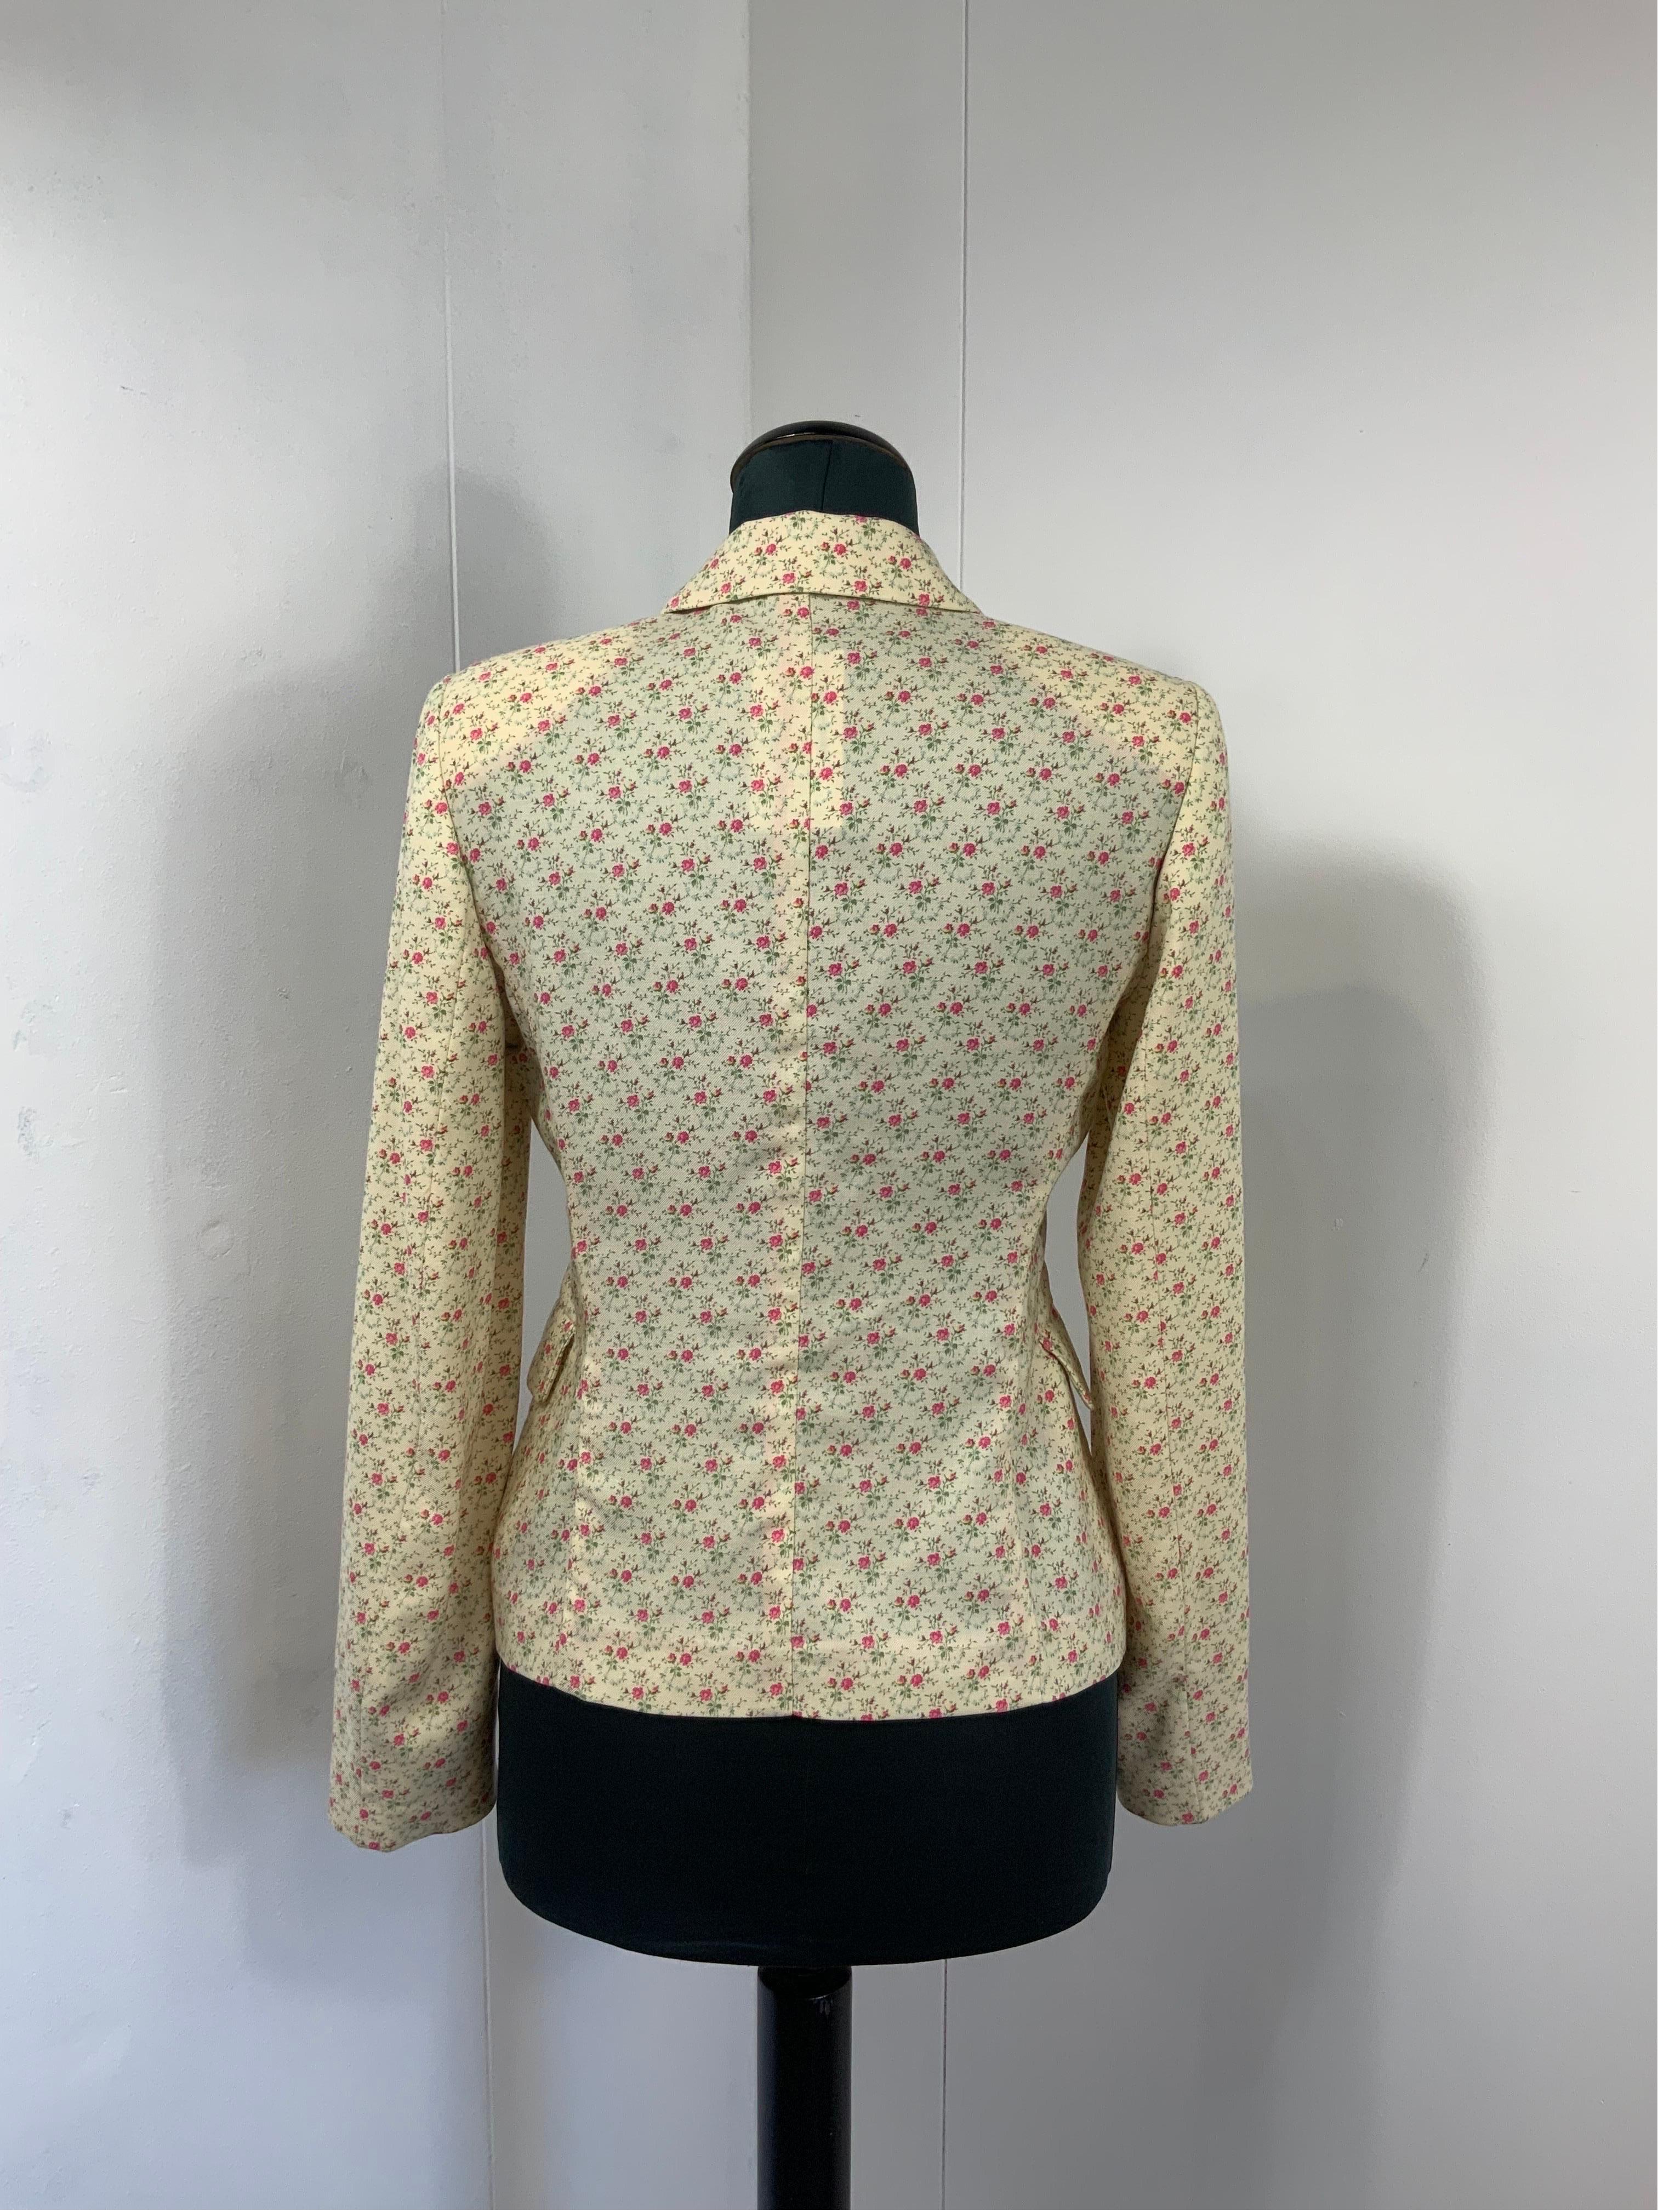 Ballantyne flower cashmere Jacket In Excellent Condition For Sale In Carnate, IT